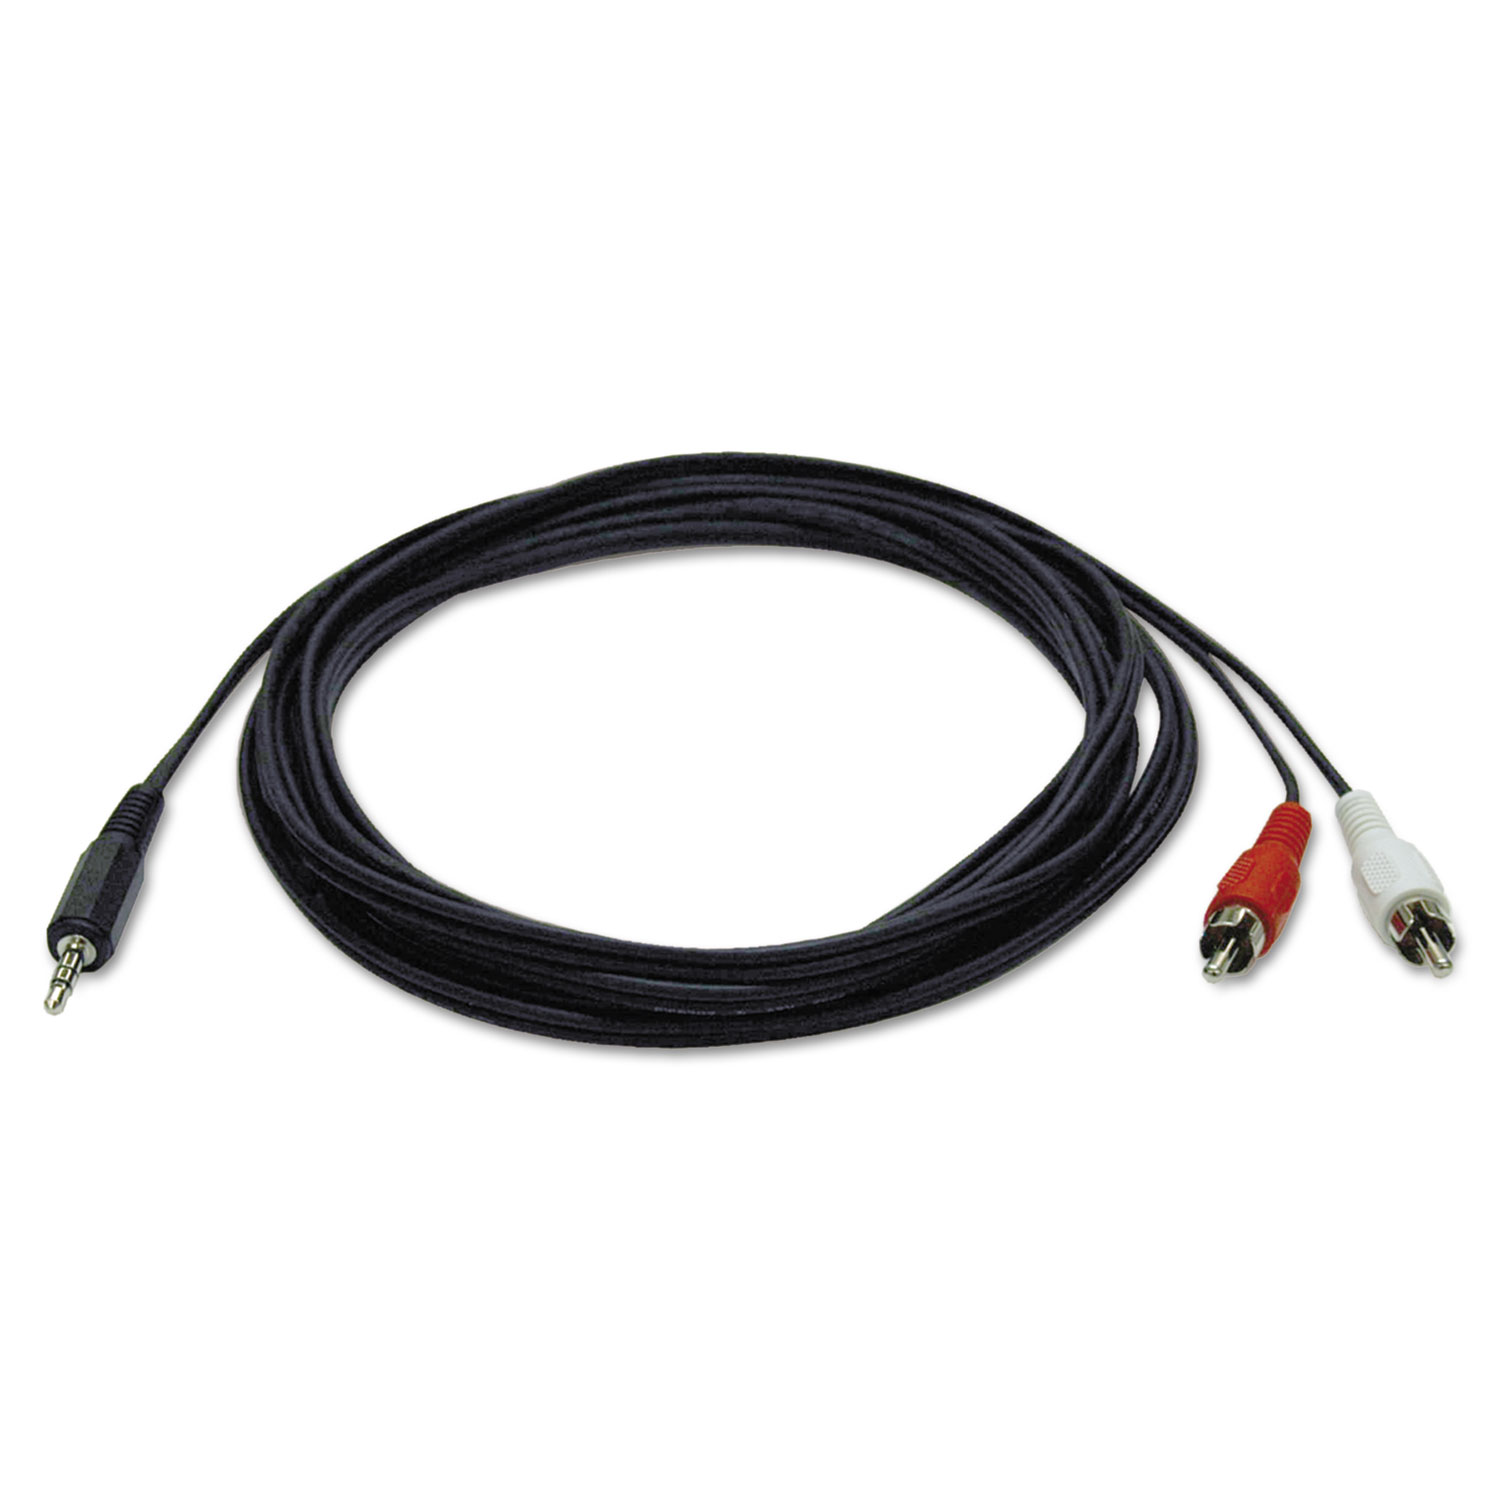  Tripp Lite P314-006 3.5mm Mini Stereo to RCA Audio Y Splitter Adapter Cable (M/M), 6 ft., Black (TRPP314006) 